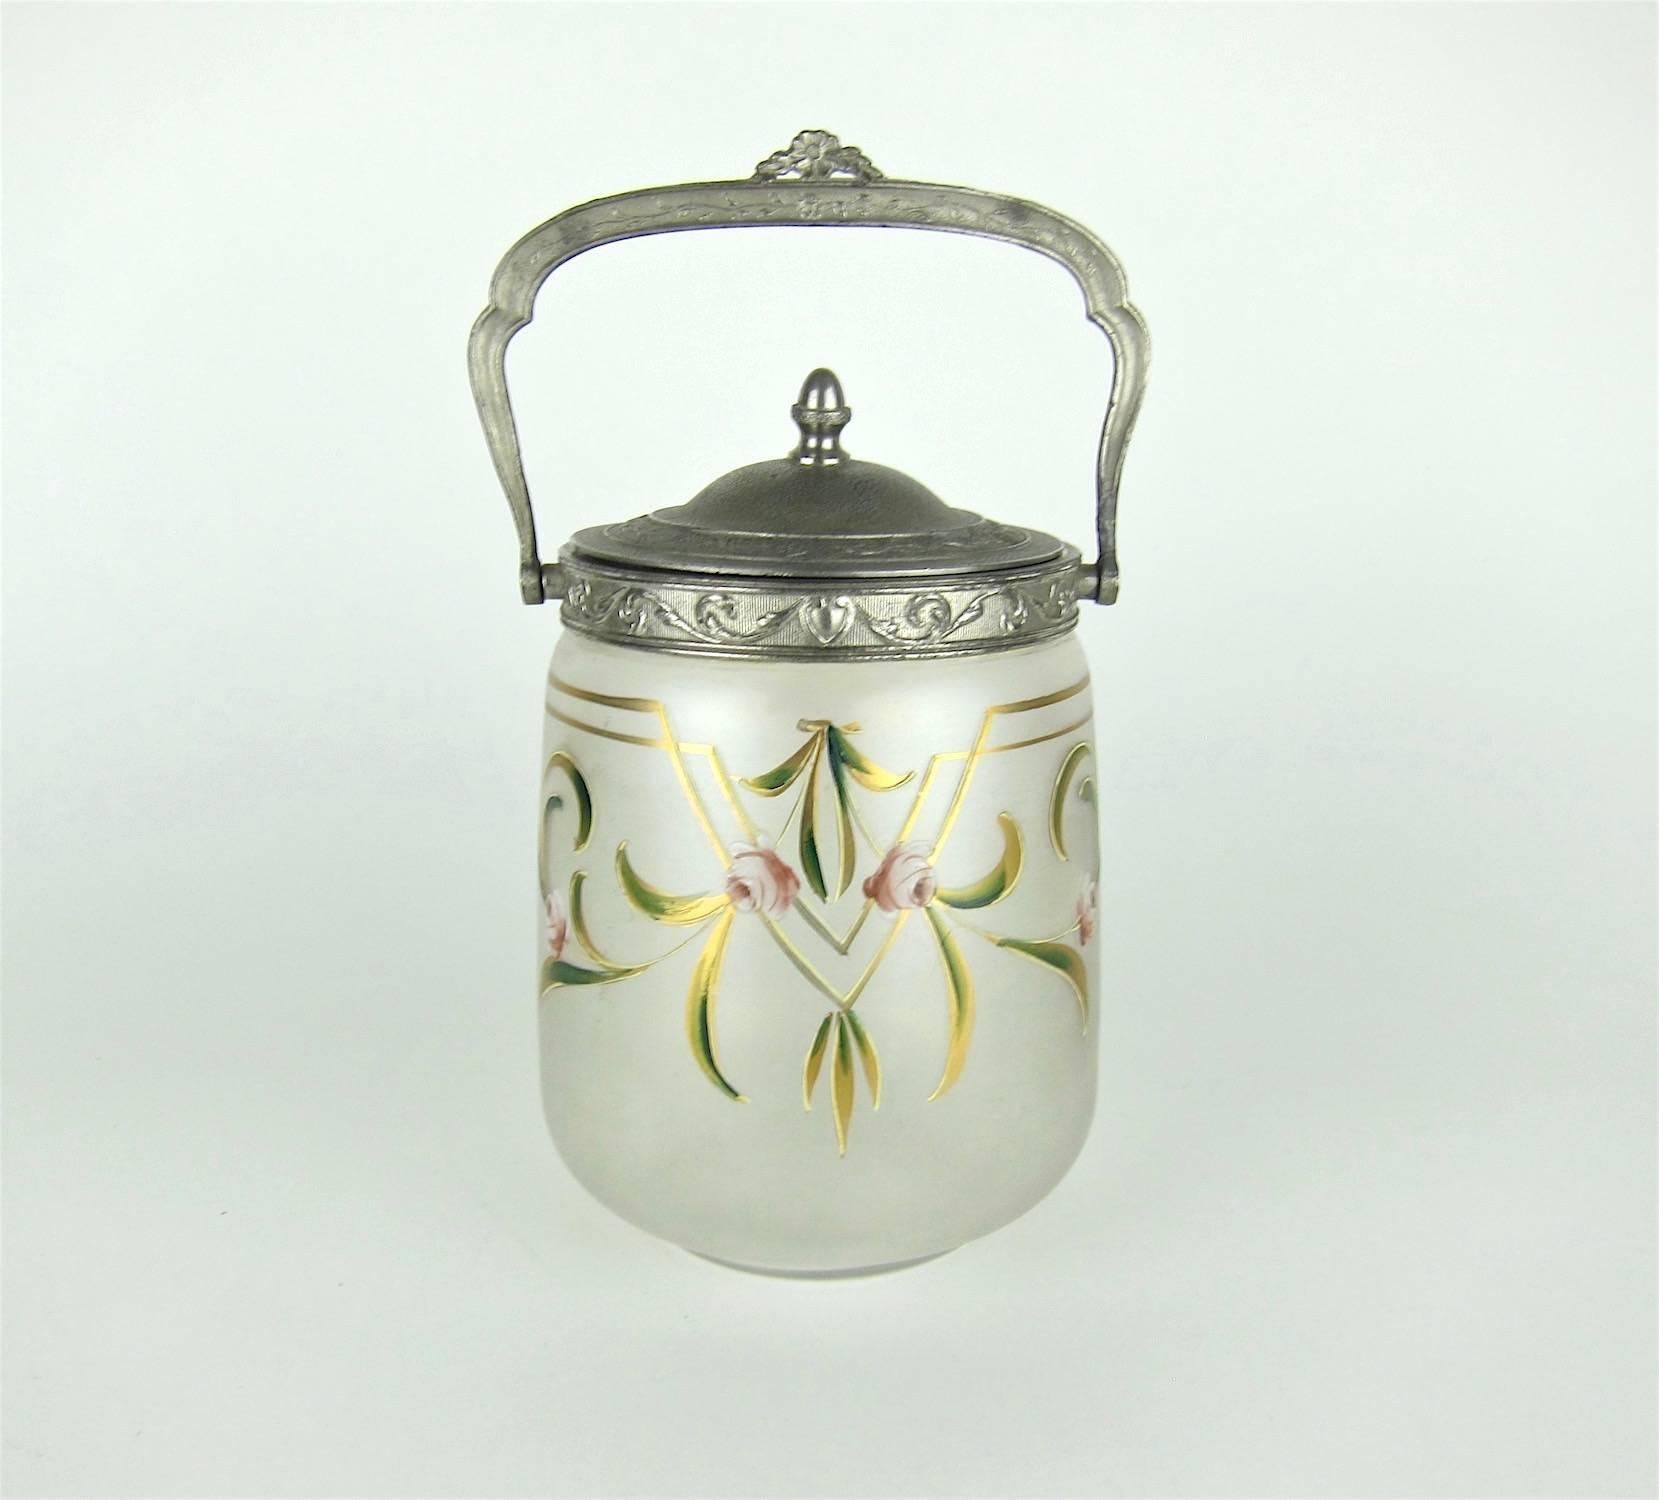 An antique biscuit jar of frosted, satin glass with a silvered metal rim, removable top, and bail handle dating to the late 19th-early 20th century. The body is skillfully decorated in raised enamels in the Art Nouveau / Jugendstil style. The piece